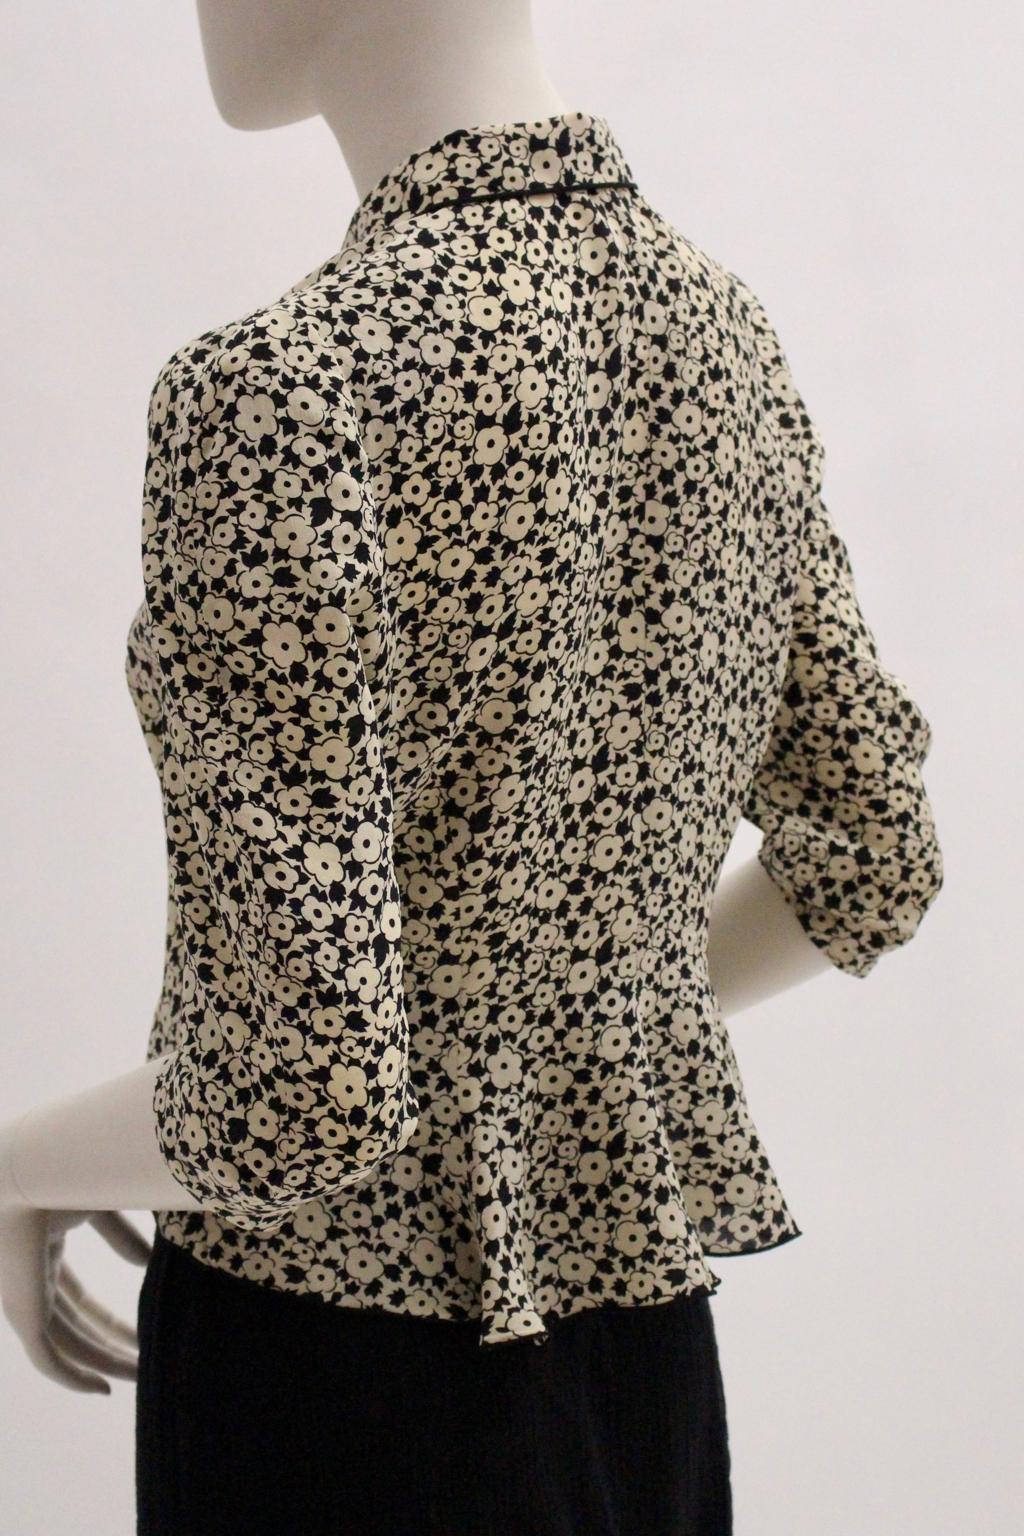 Lolita Lempicka Vintage Silk Blouse with Flower Allover Print  1980s For Sale 12